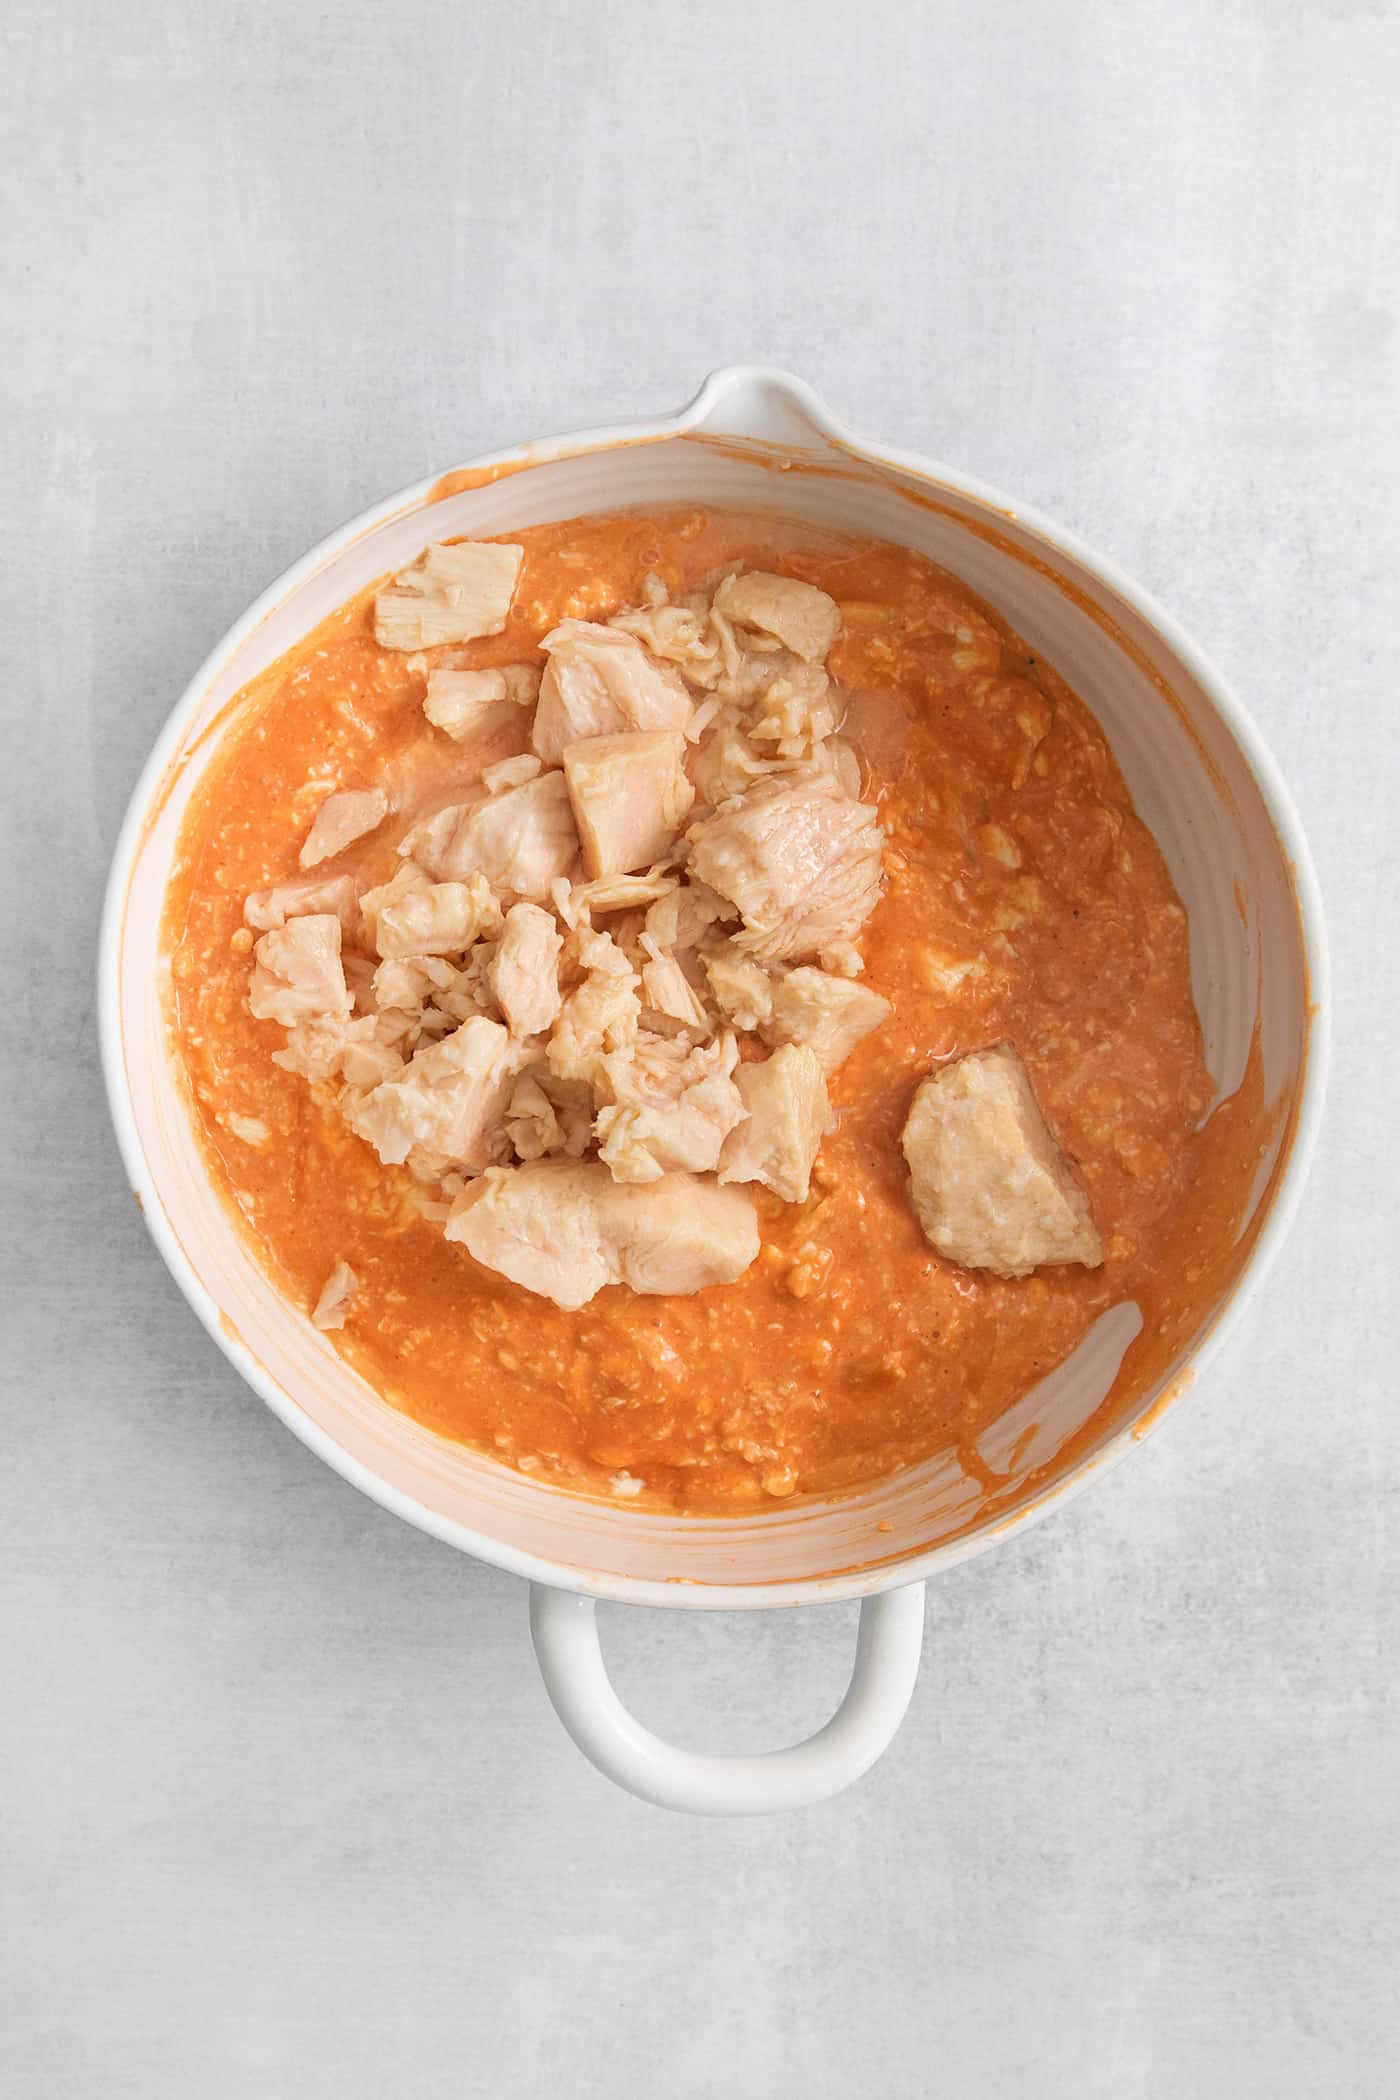 Canned chicken added to a bowl with hot sauce and cream cheese